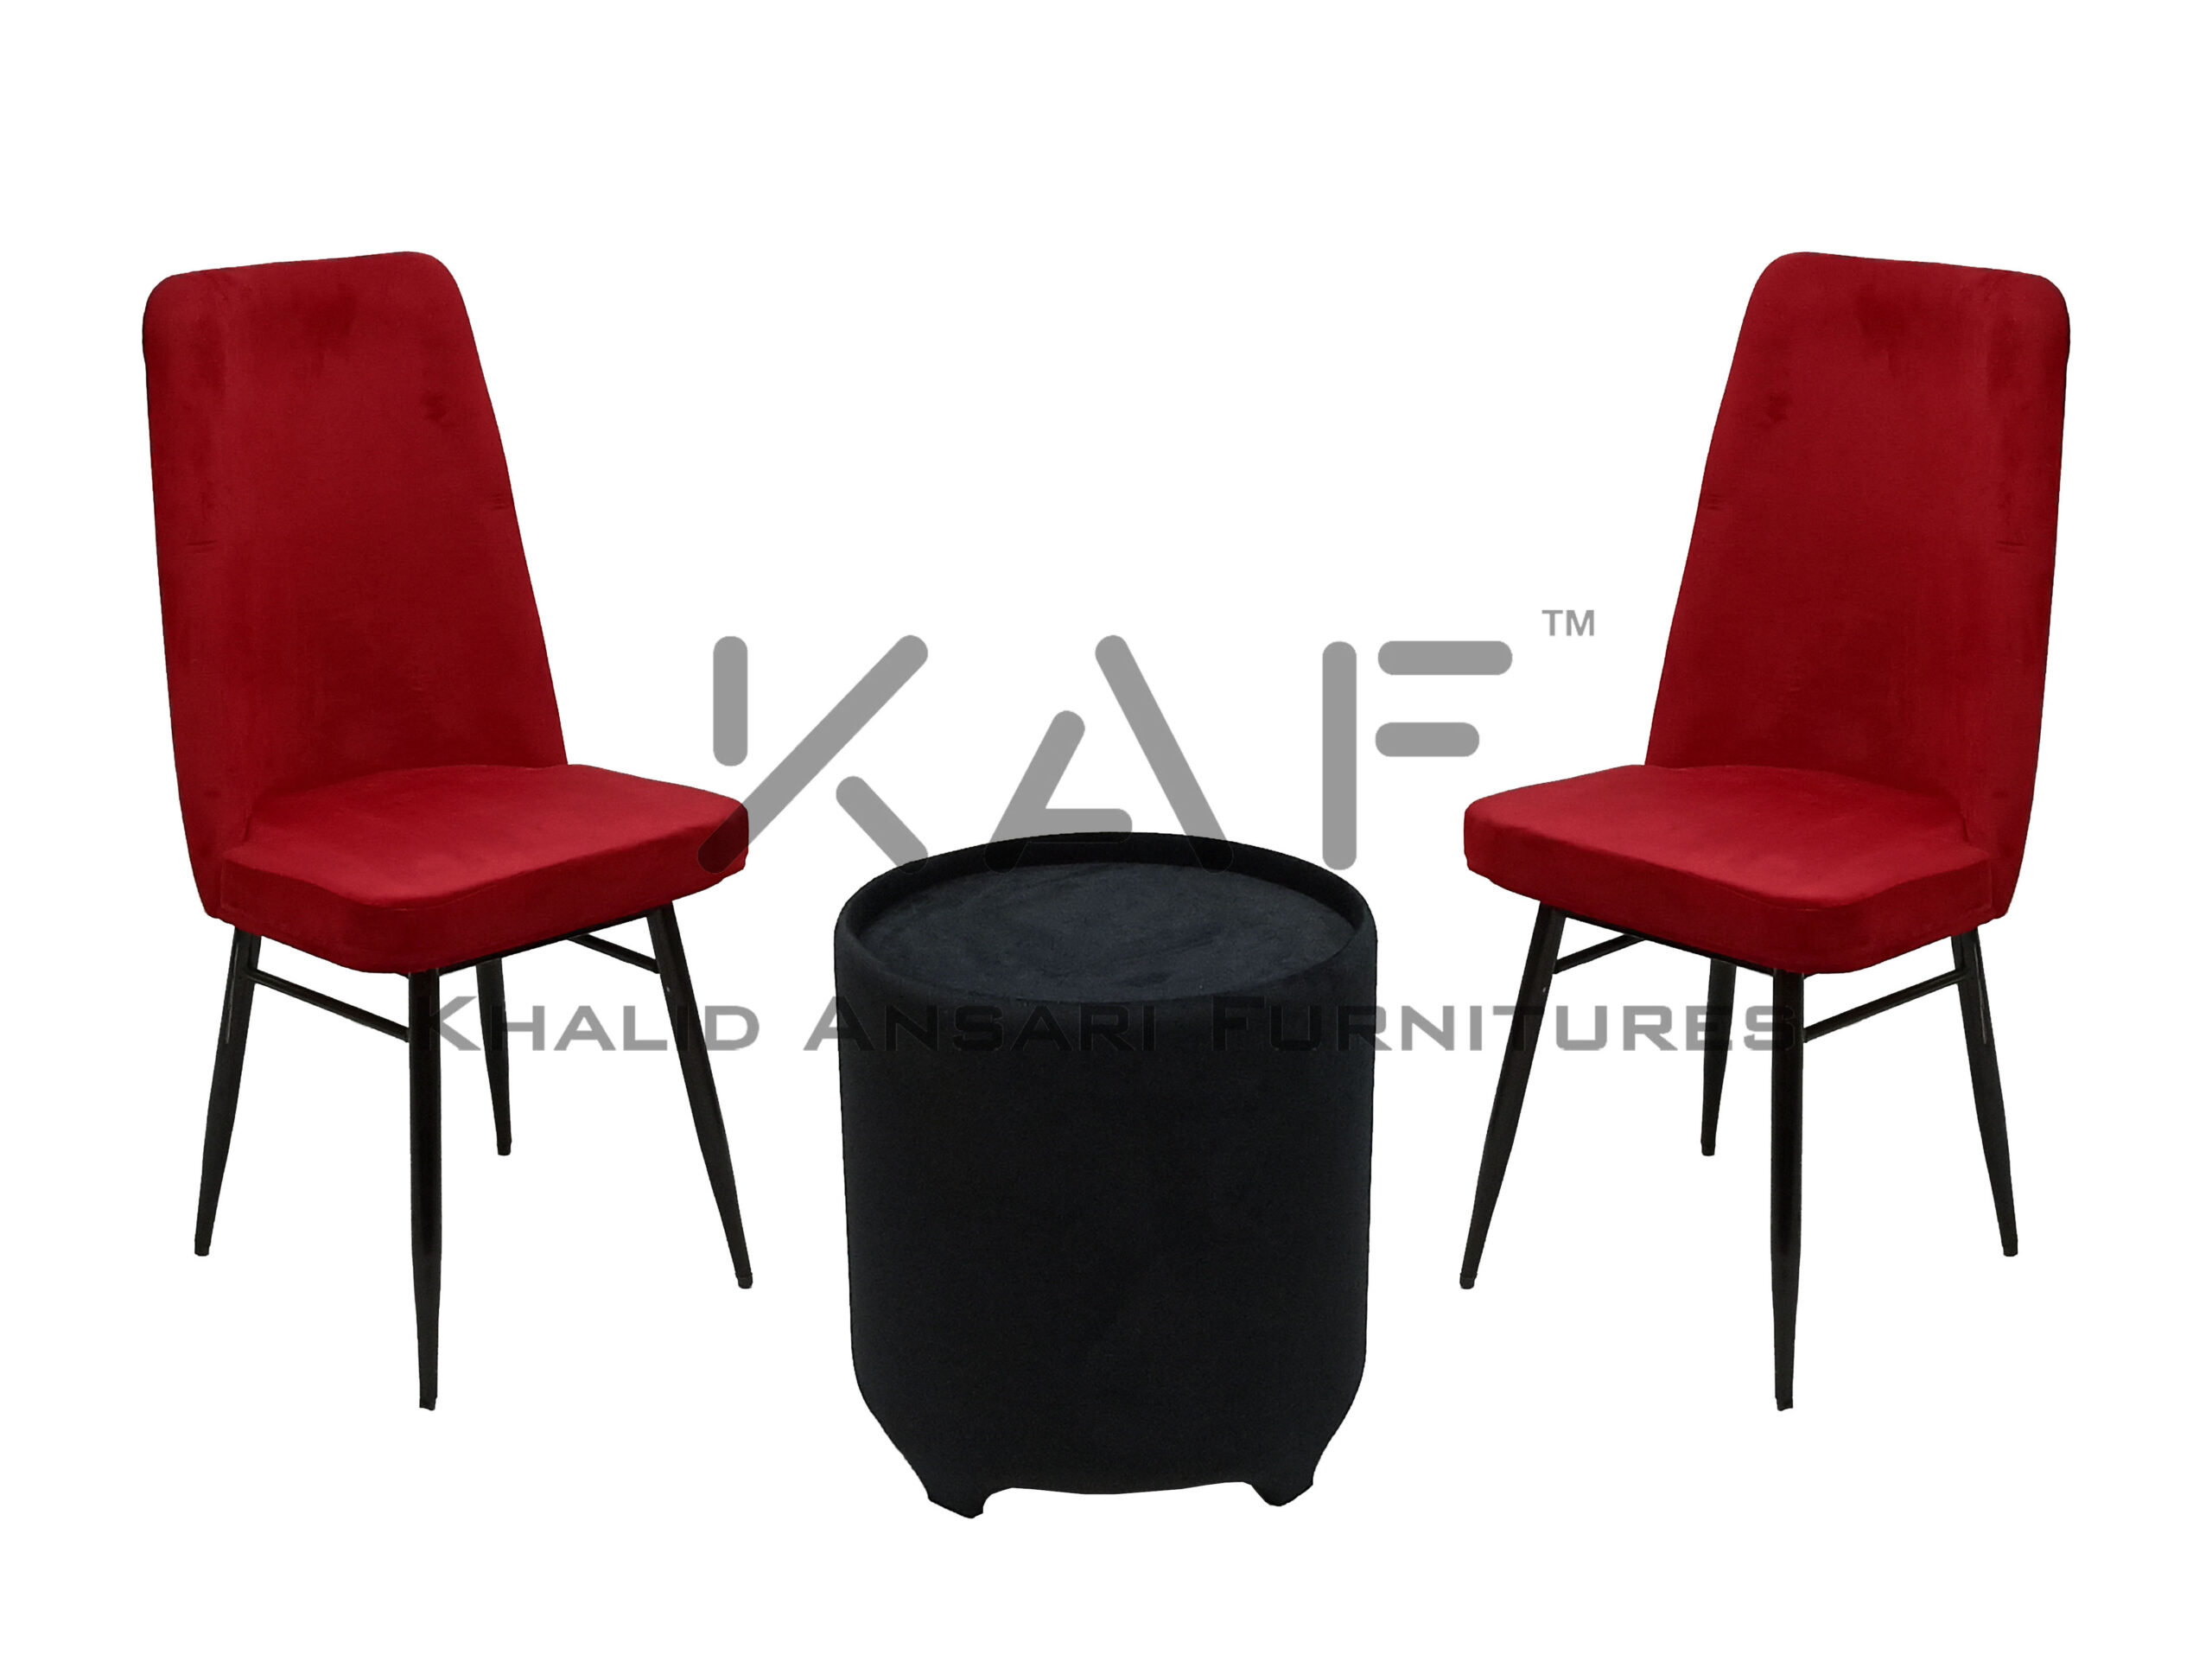 Bed Room Premium Chair & Dining Chair Red & Stripped Velvet set with Black Velvet Tea Table - 2 Chairs + 1 Table